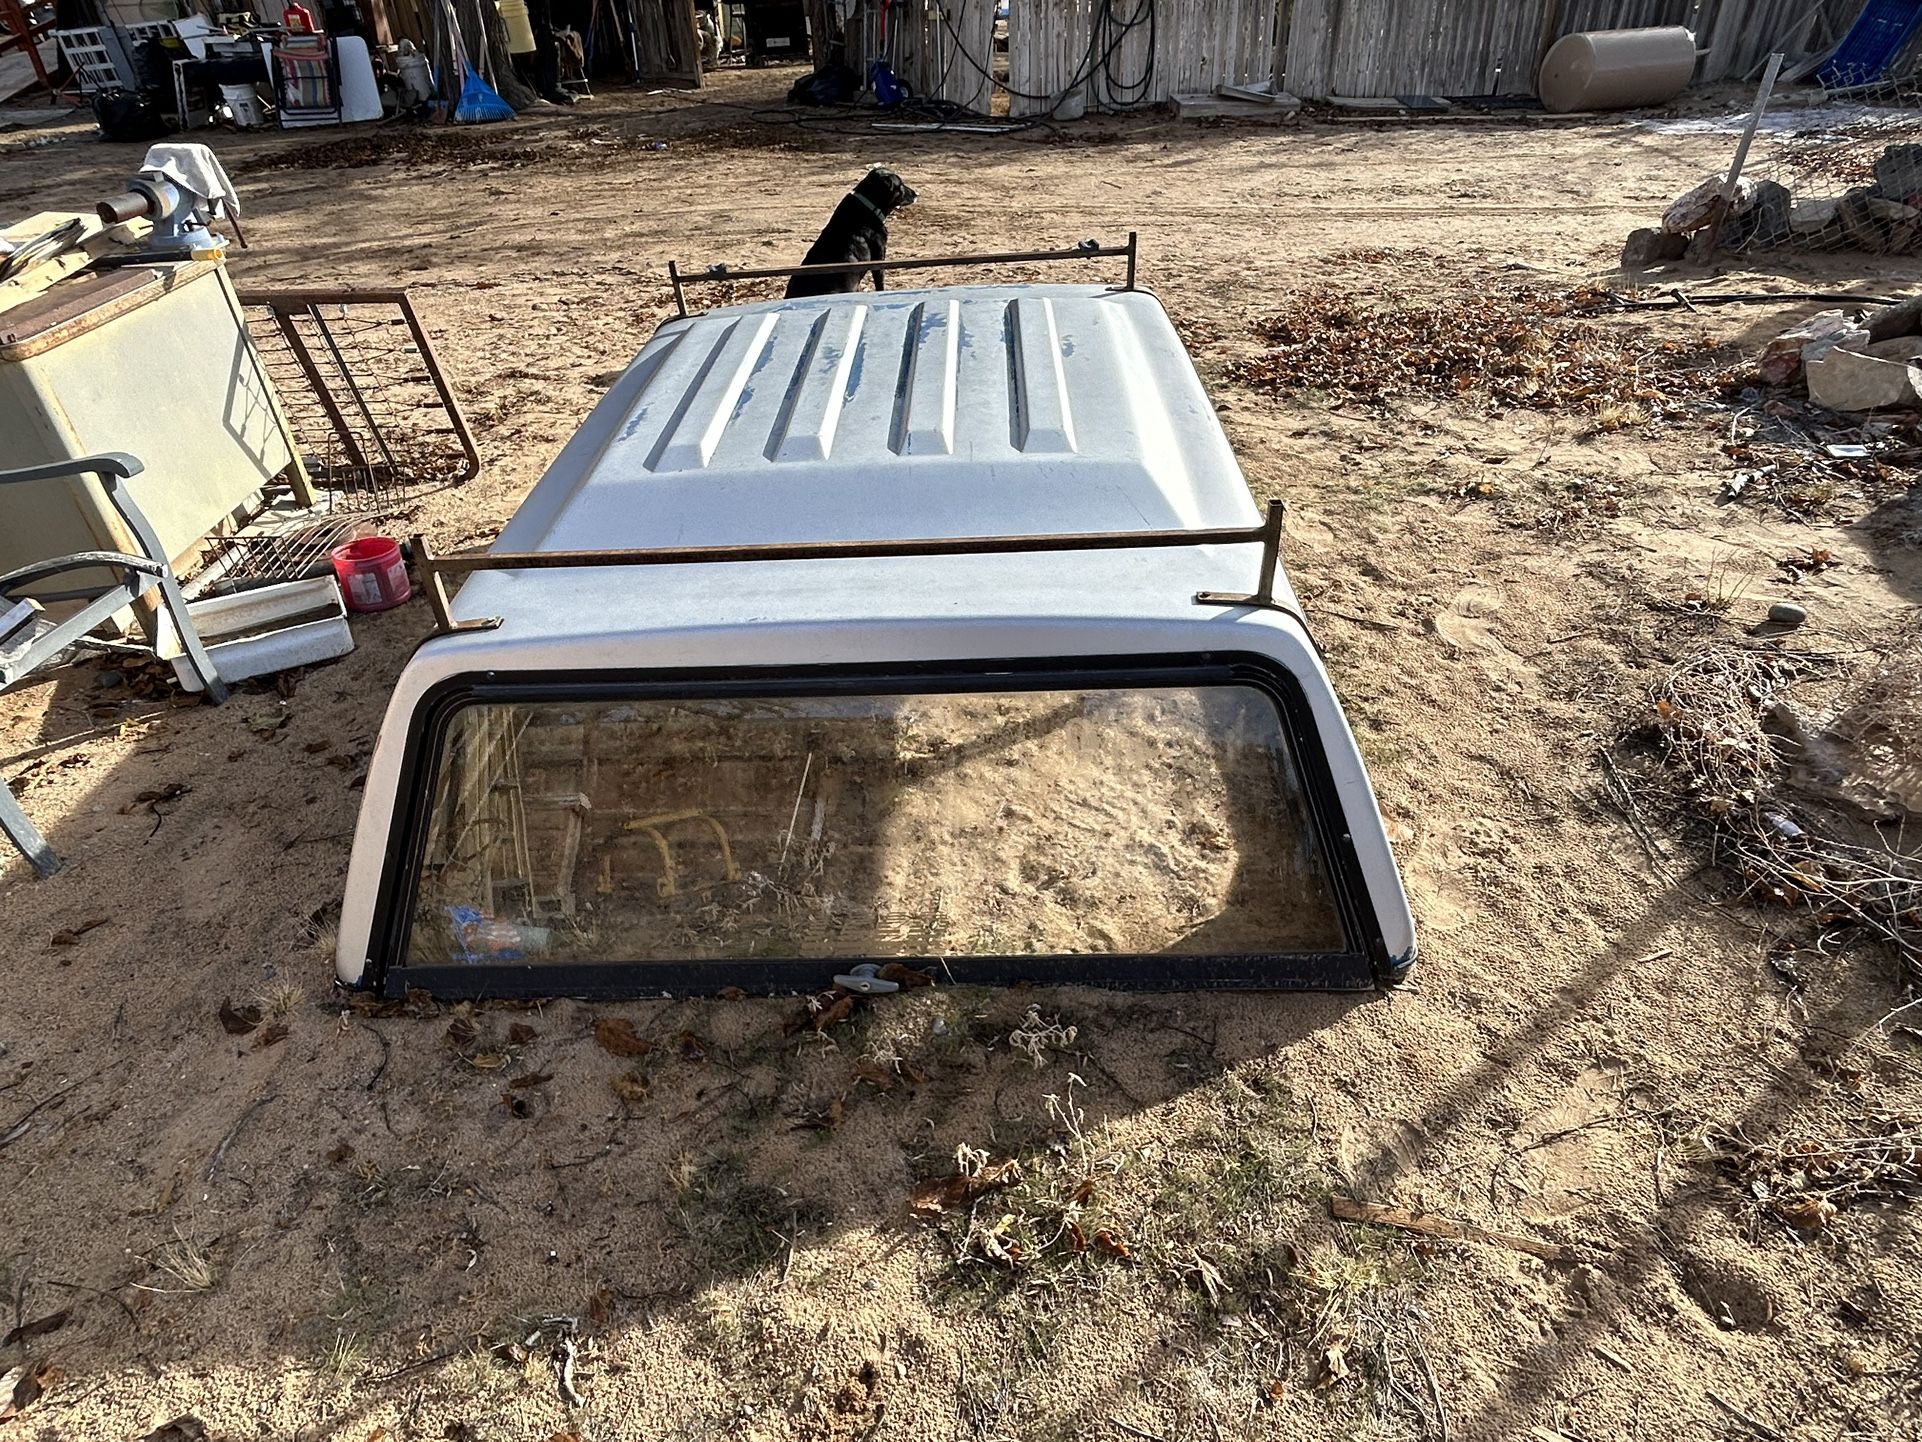 Camper Shell For Sale